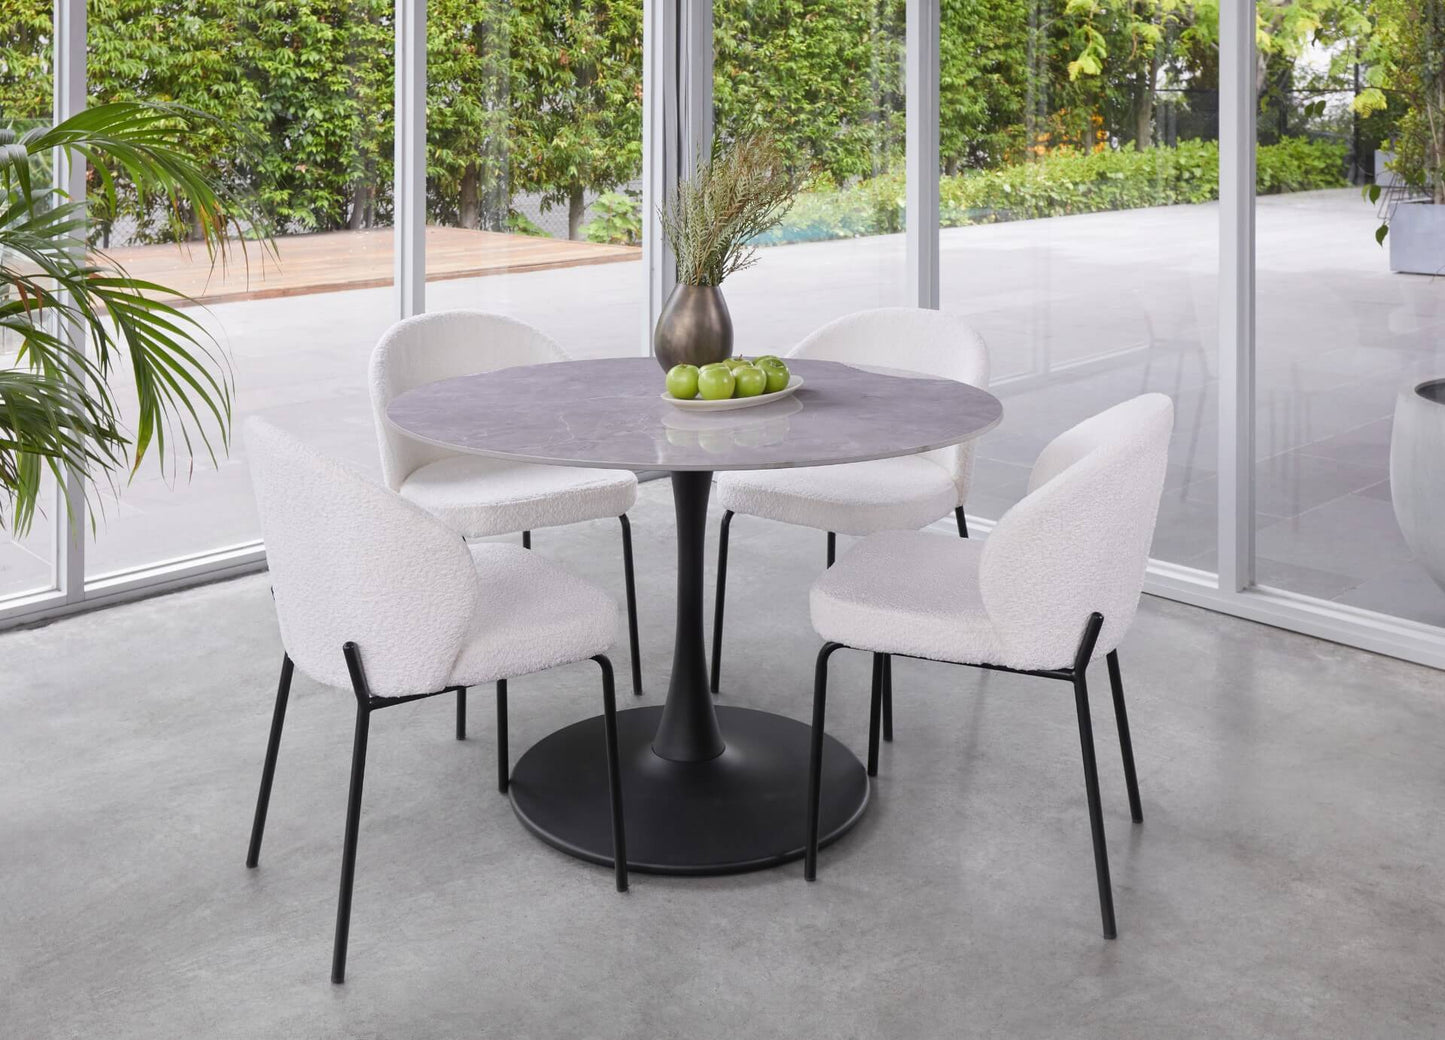 Andre | Metal Scratch Resistant Polished Ceramic 4 Seater Round Dining Table | Grey